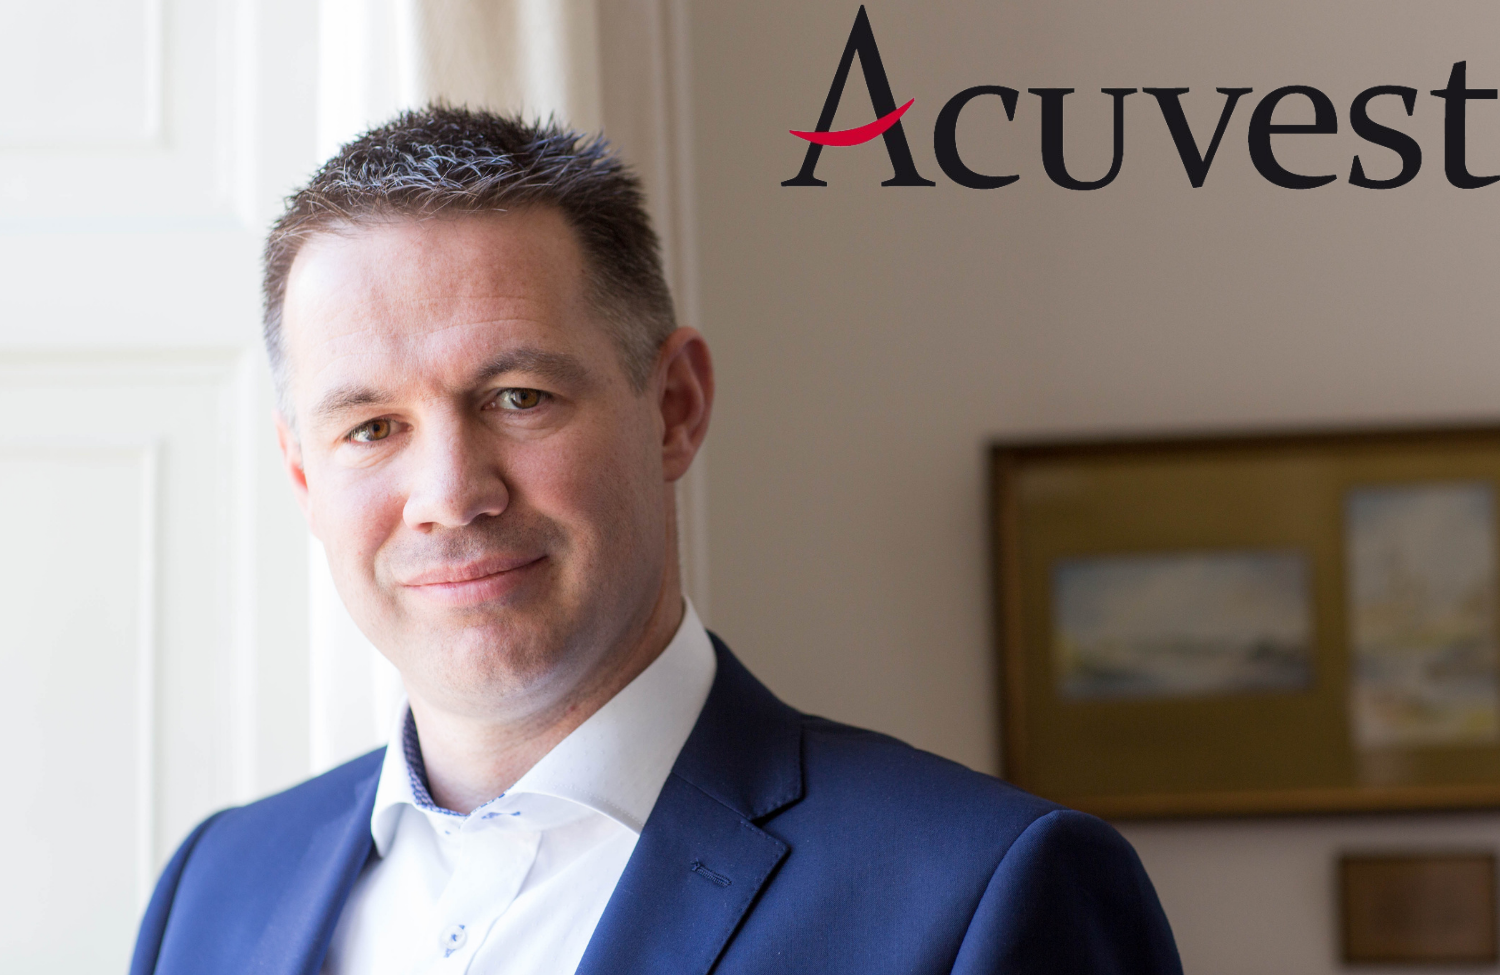 Q&A: John Tuohy, CEO of Acuvest Ltd.